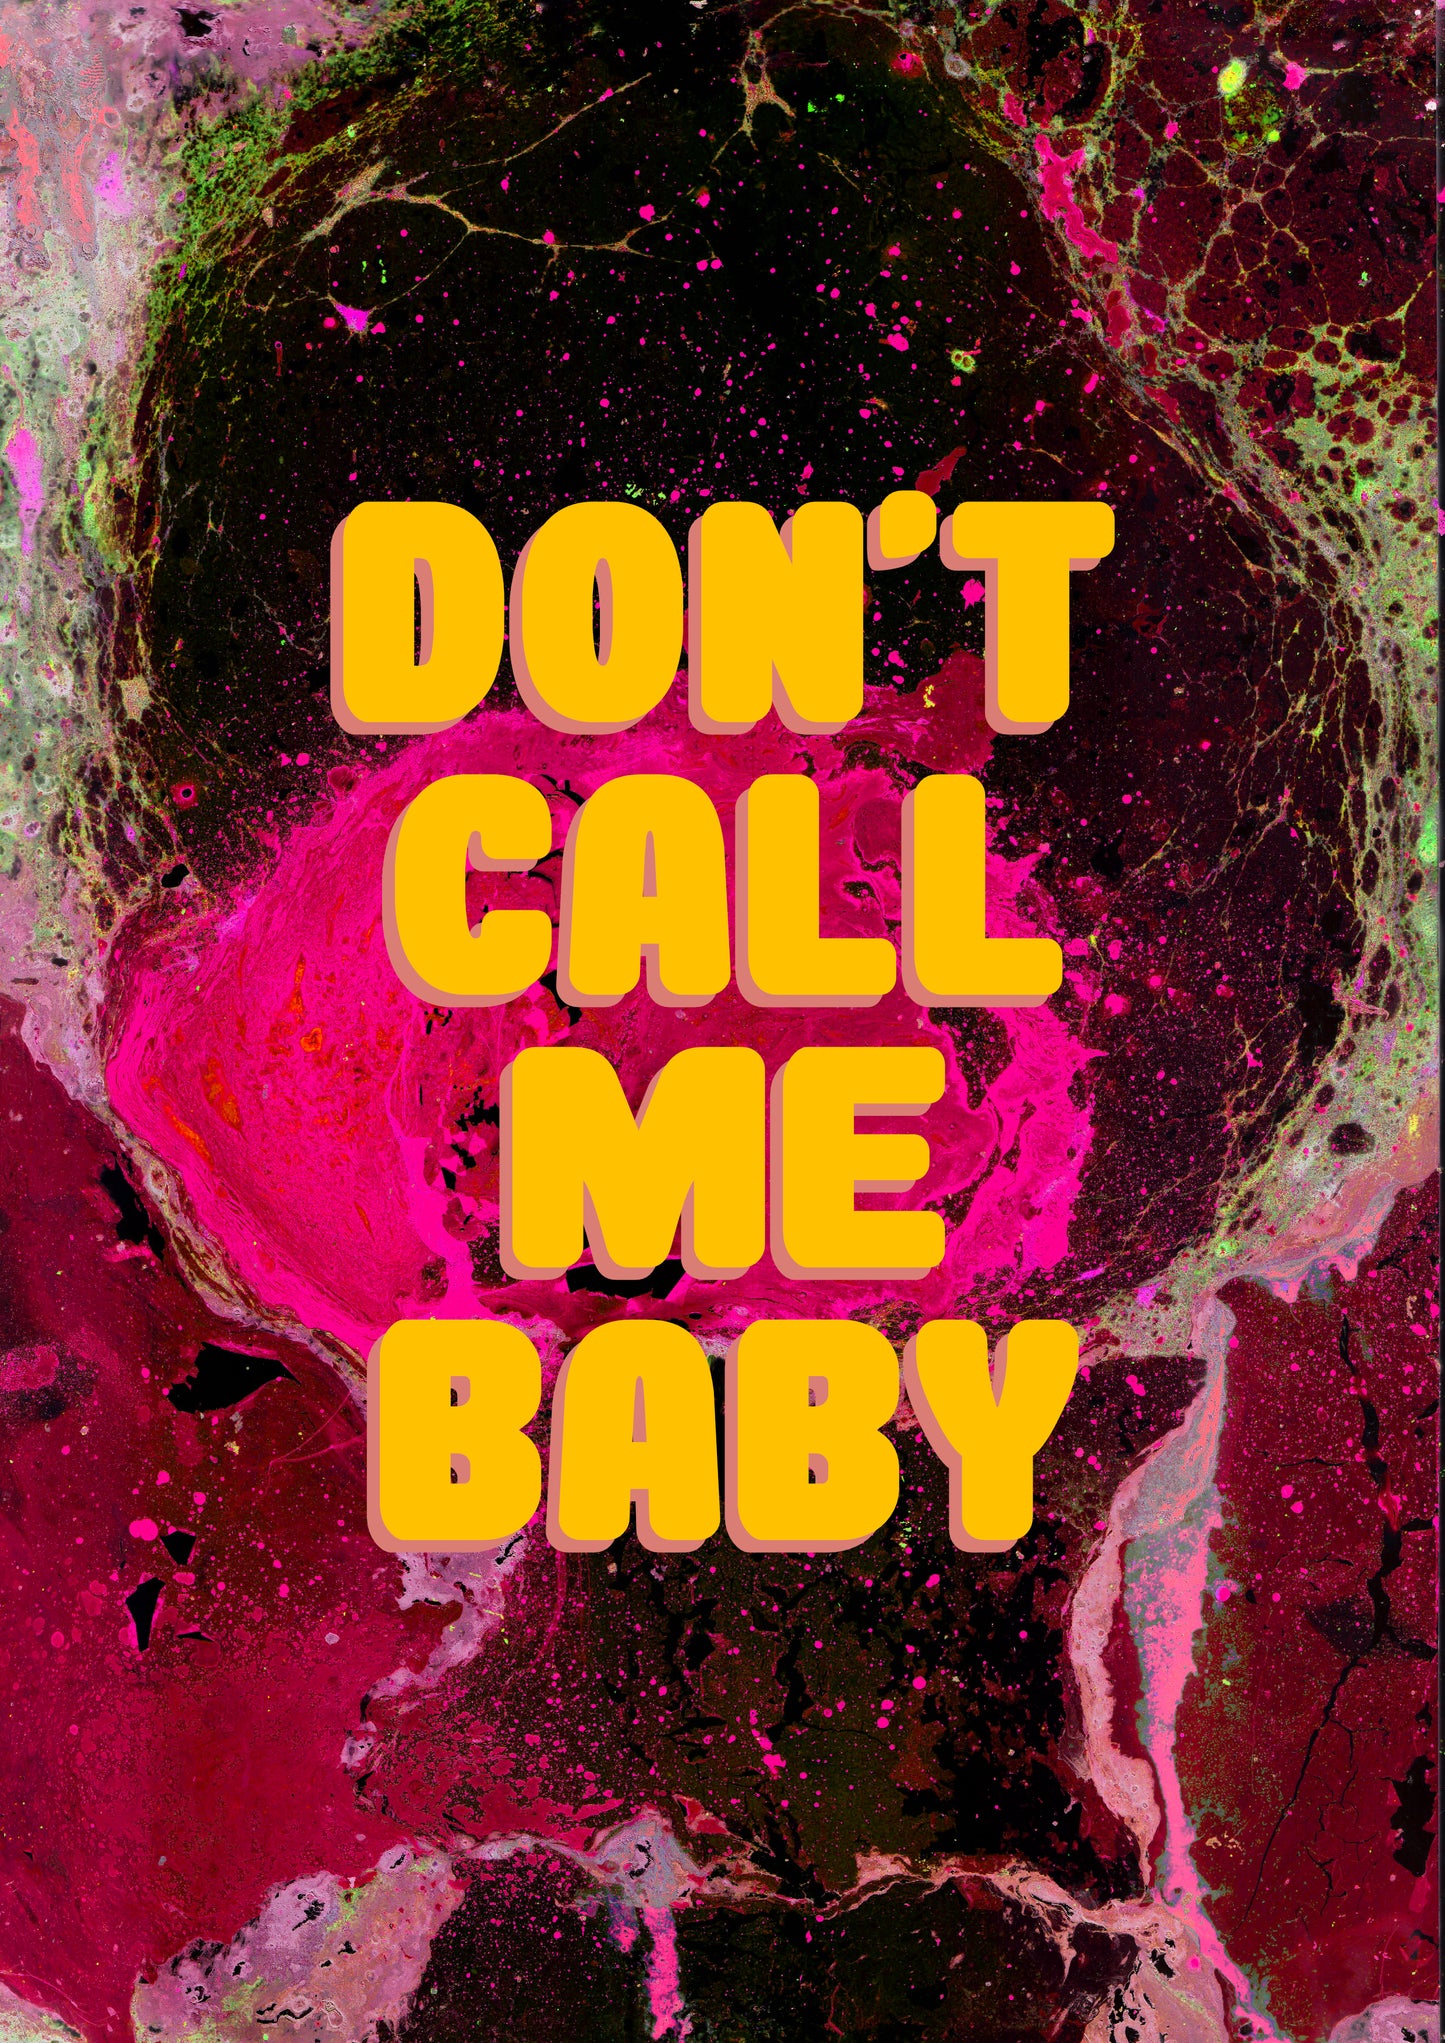 DON'T CALL ME BABY